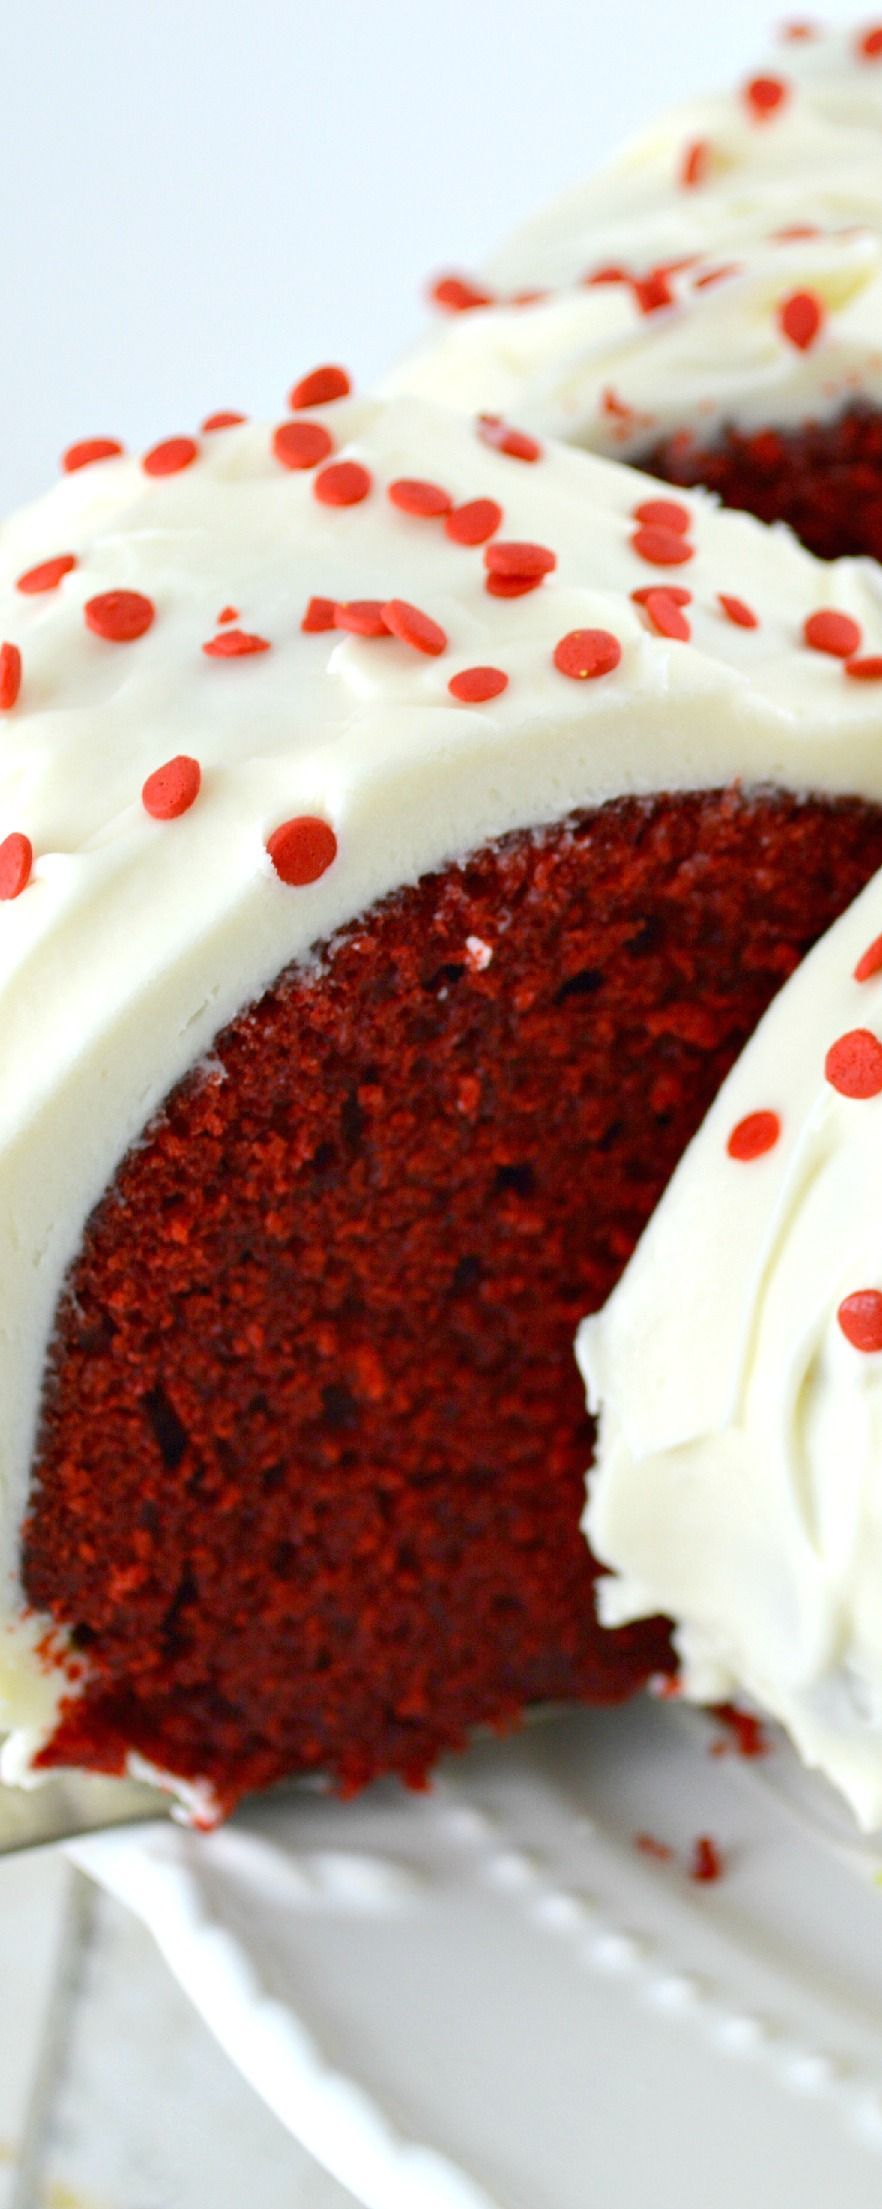 Red Velvet Bundt Cake from Scratch! This cake is amazing. Tender, moist, with just the right amount of chocolate!  And it’s of